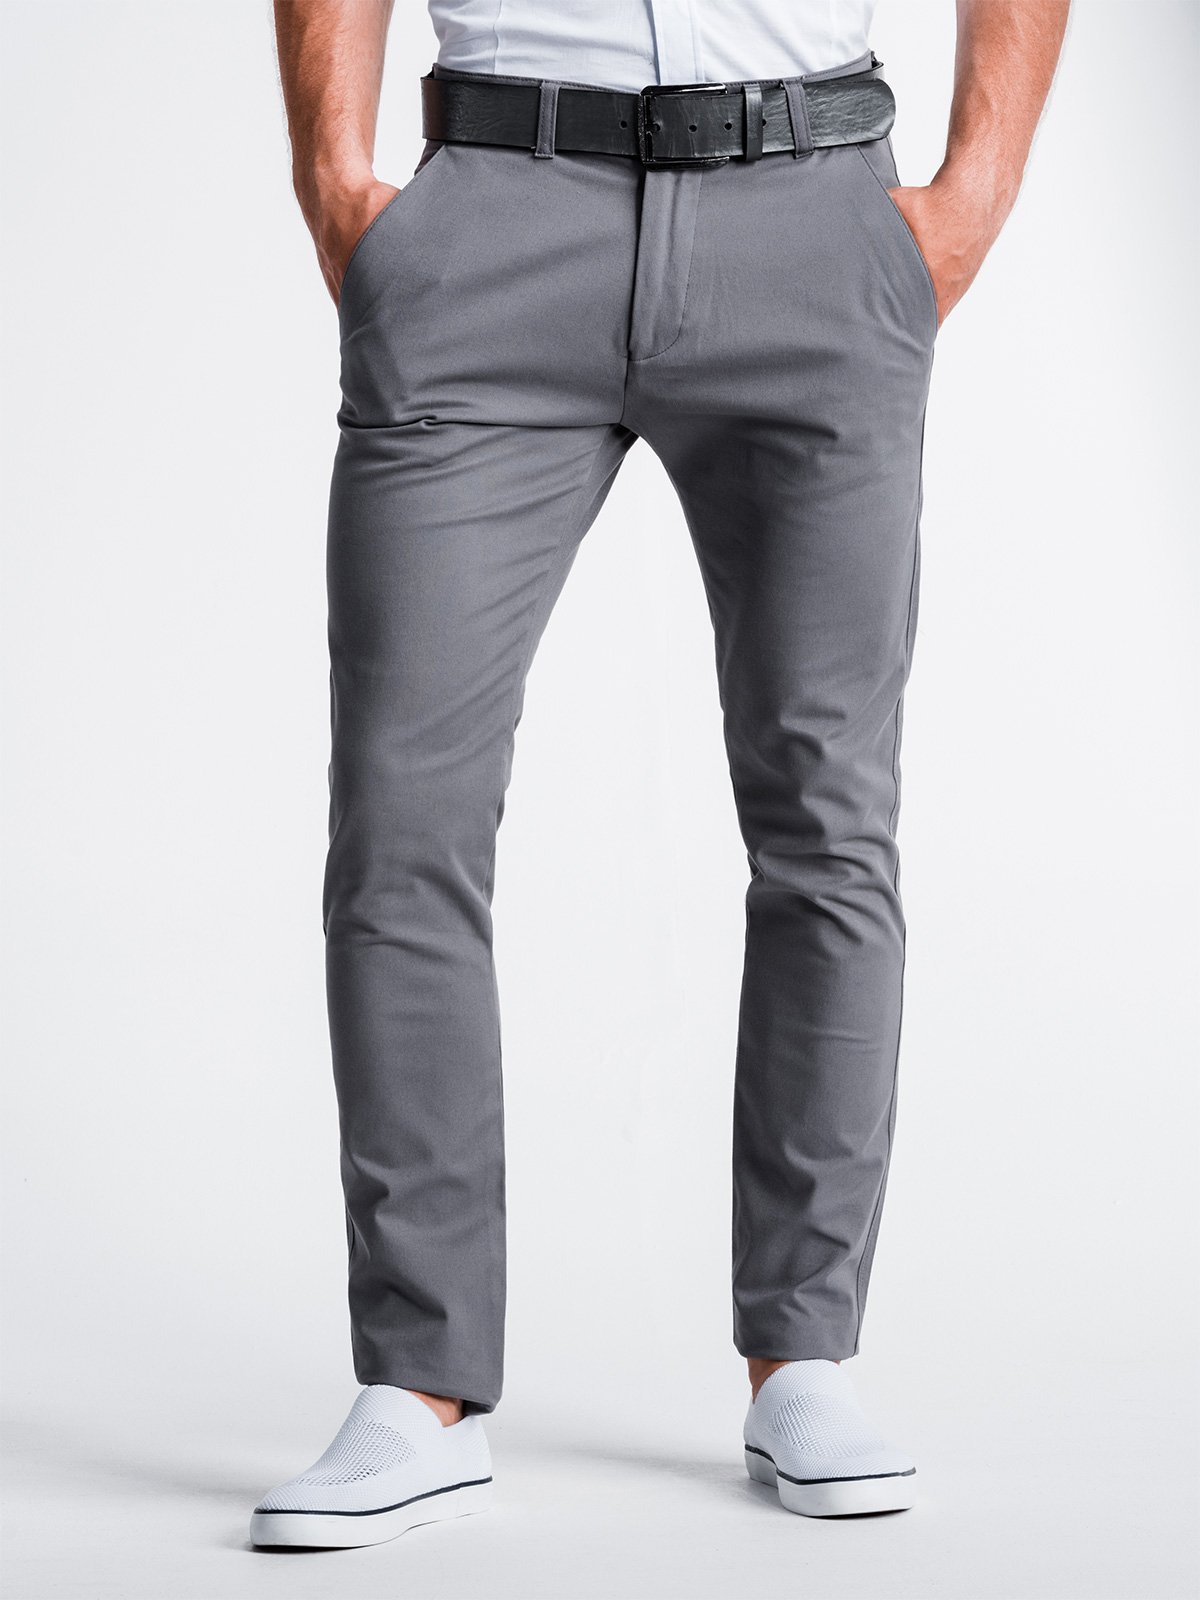 Men's pants chinos P830 - grey | MODONE wholesale - Clothing For Men